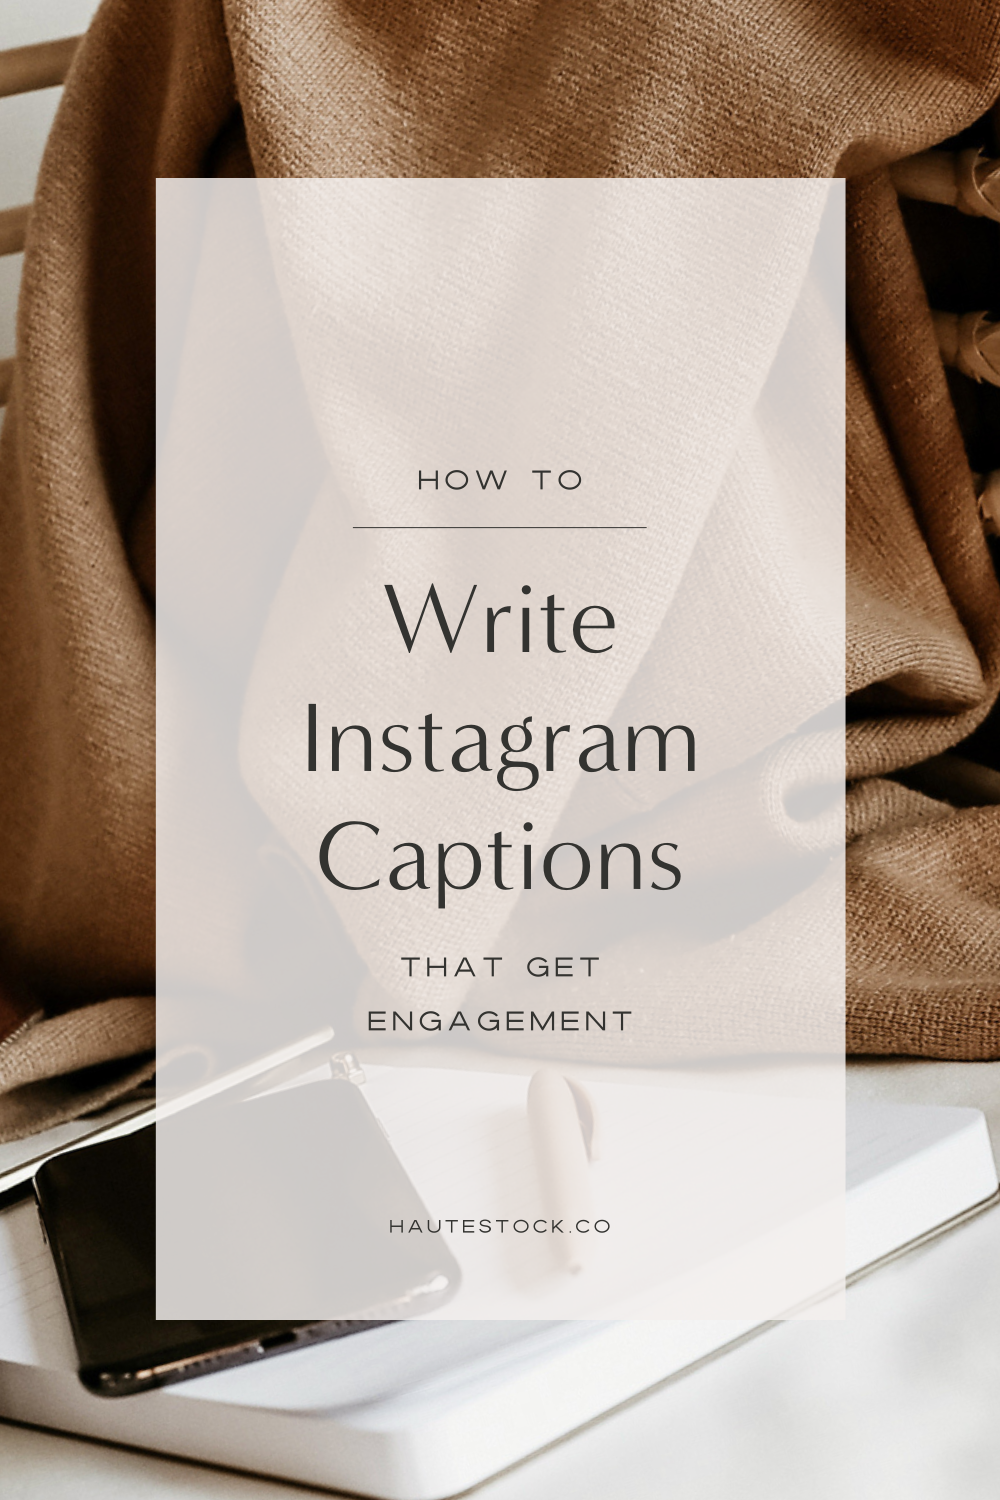 Learn how to write engaging Instagram captions for your business using a simple 4 step formula.